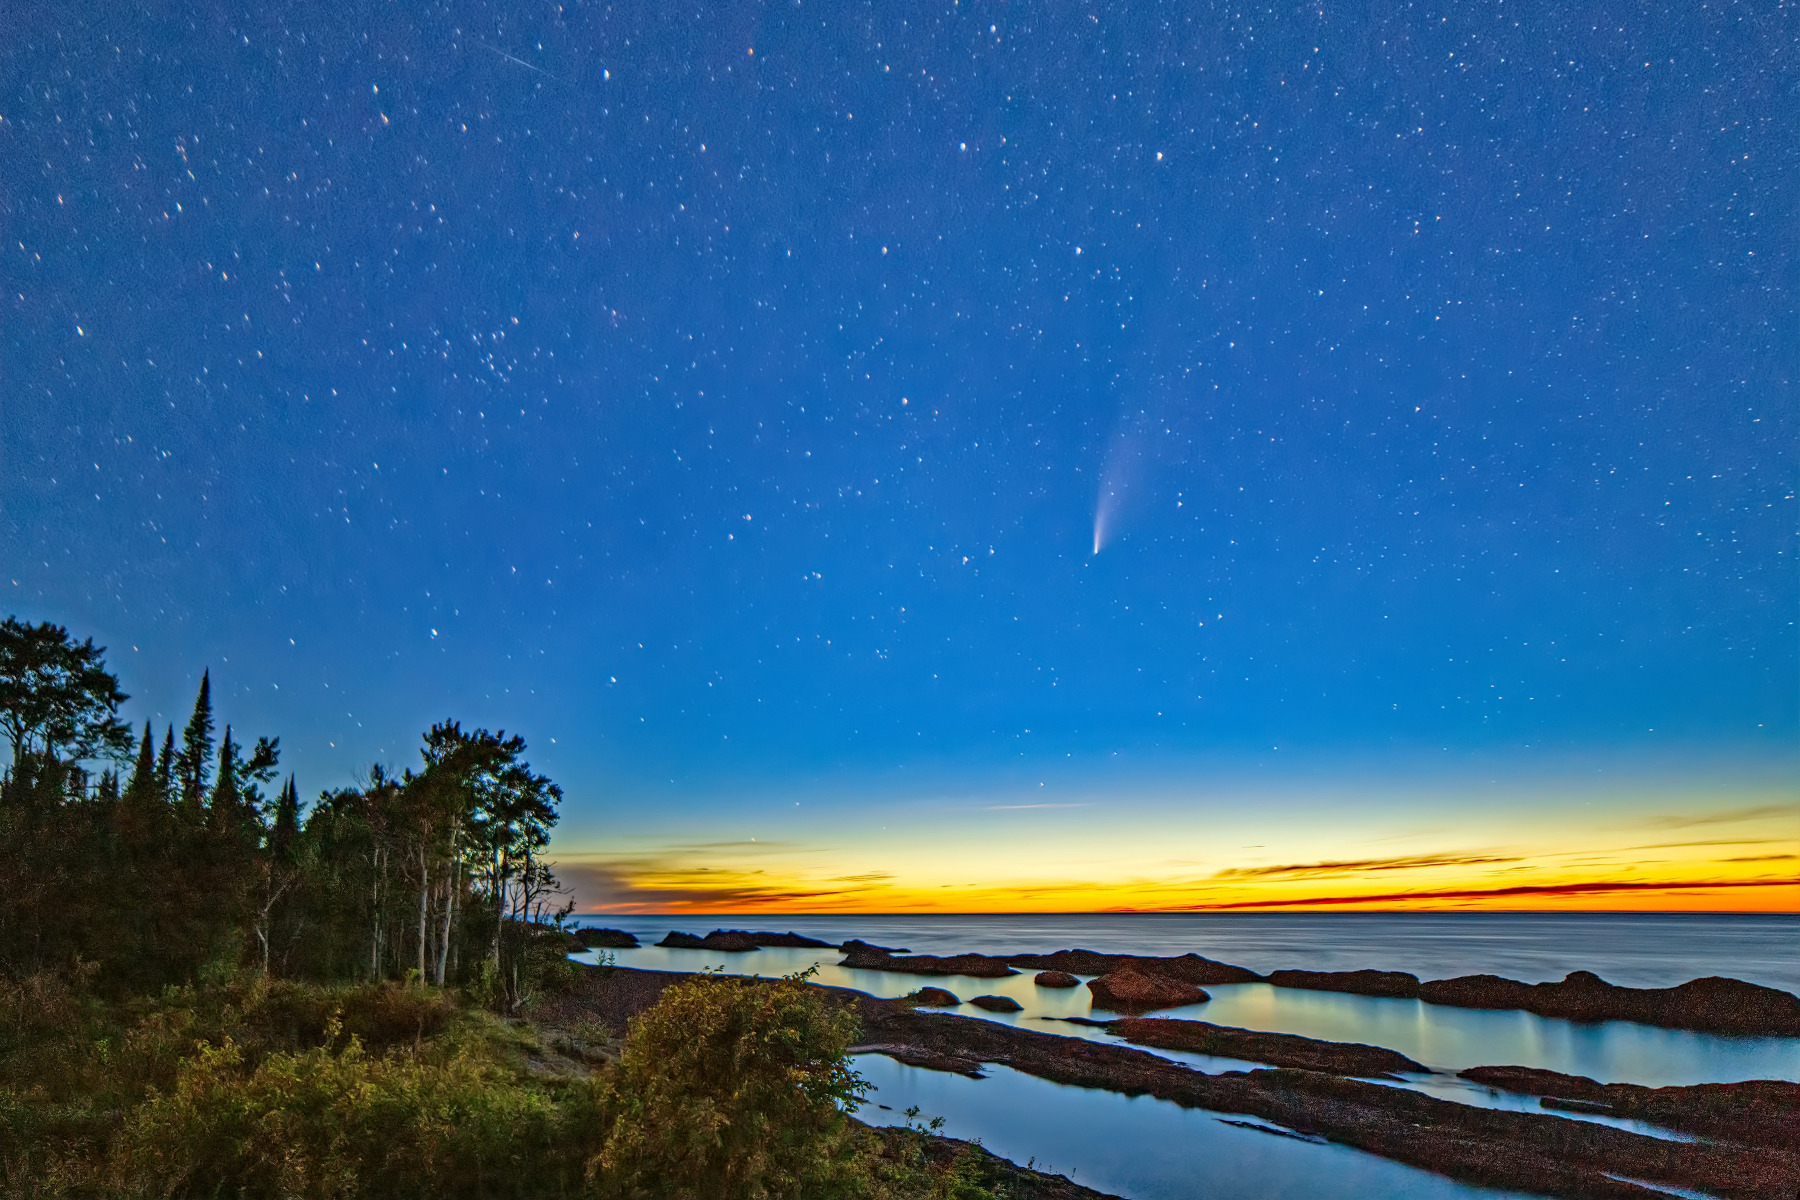 George C Bailey, Comet Neowise, North Shore of the Keweenaw Peninsula